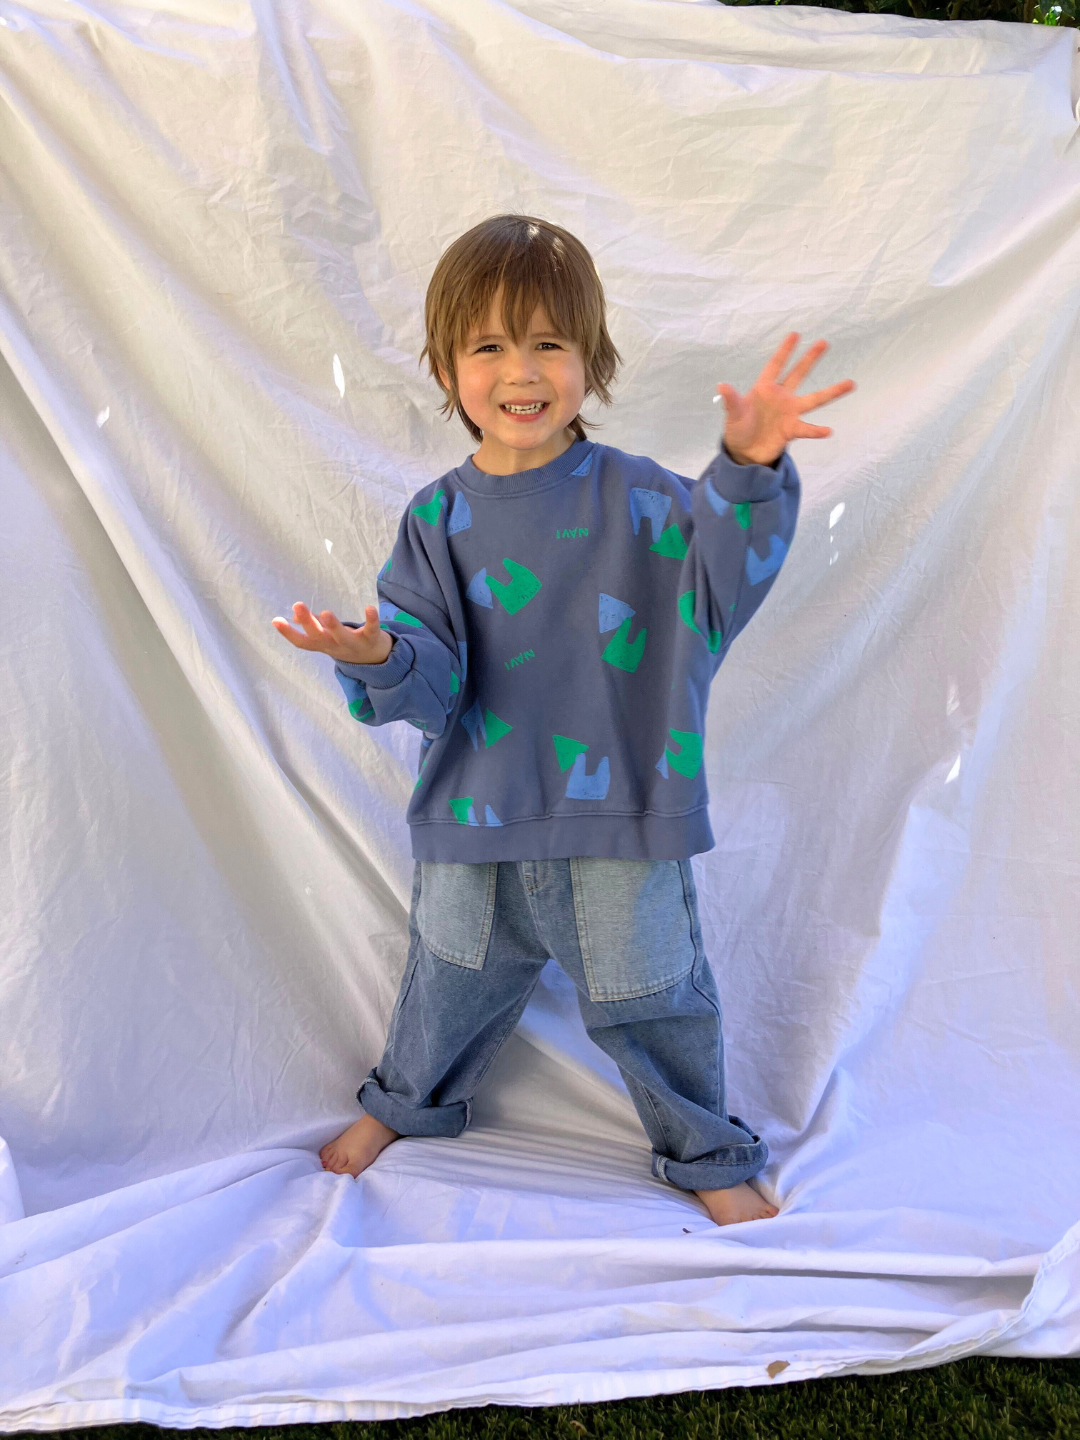 Vintage Blue | Child wearing the kids Duo Sweatshirt in faded blue printed with green and blue shapes and the word Navi. He is smiling and waving both hands, and wearing baggy blue jeans, and standing on a white sheet backdrop over grass.